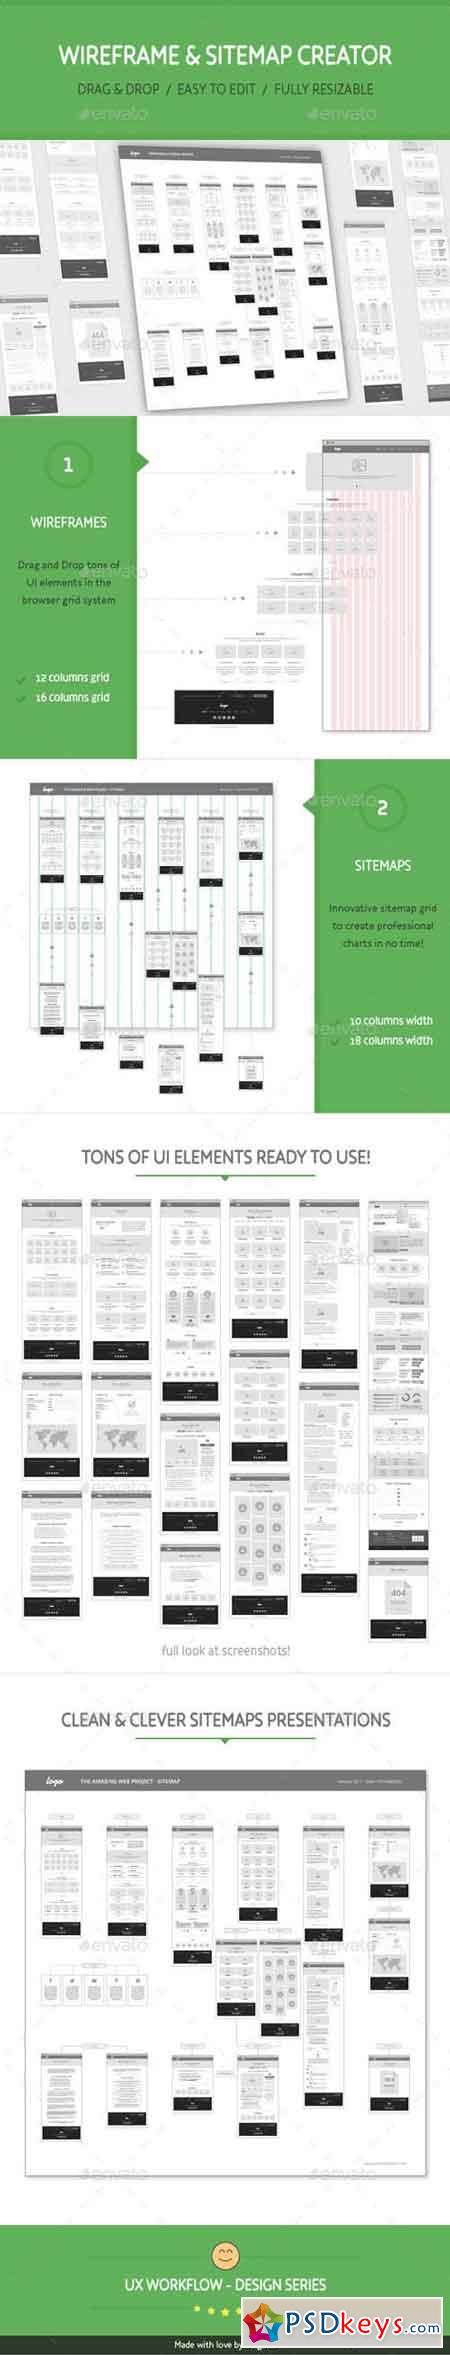 UX Workflow - Wireframe and Sitemap Creator 18406253